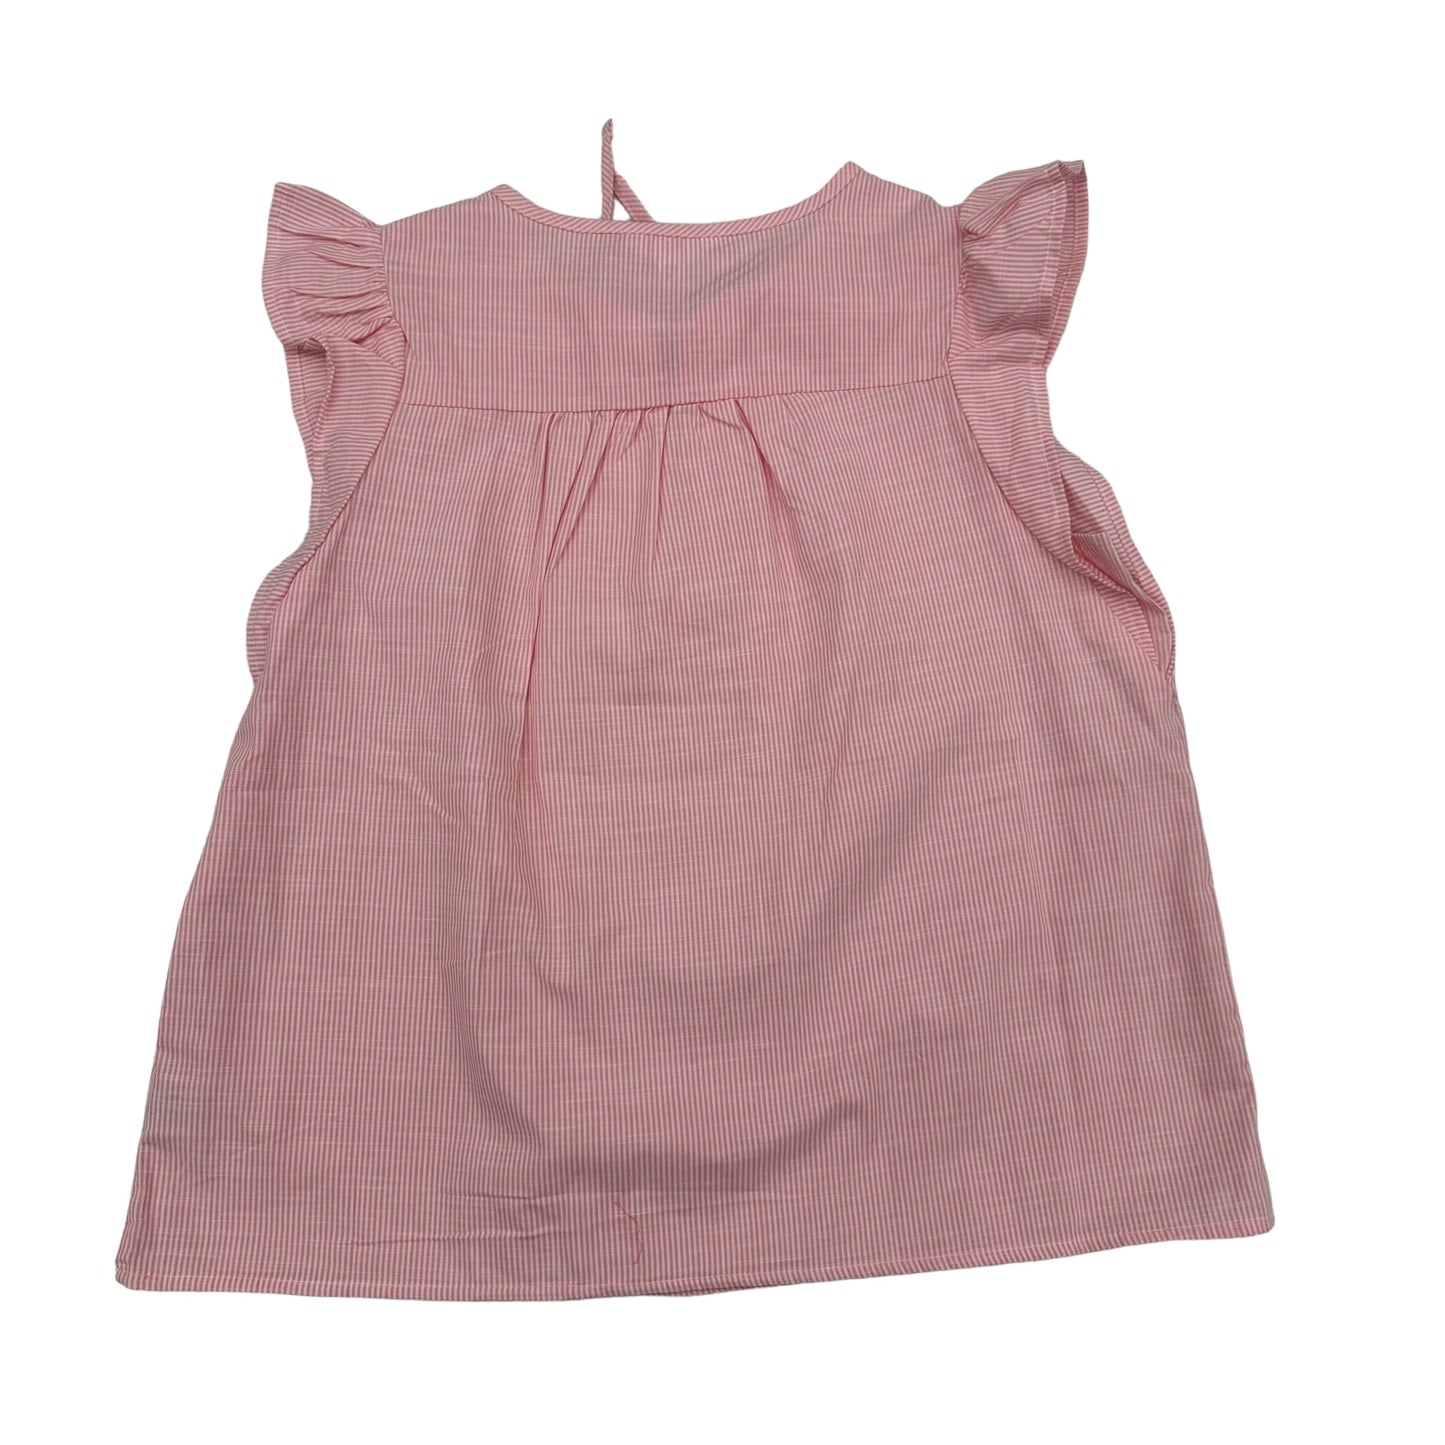 PINK TIME AND TRU TOP SS, Size S